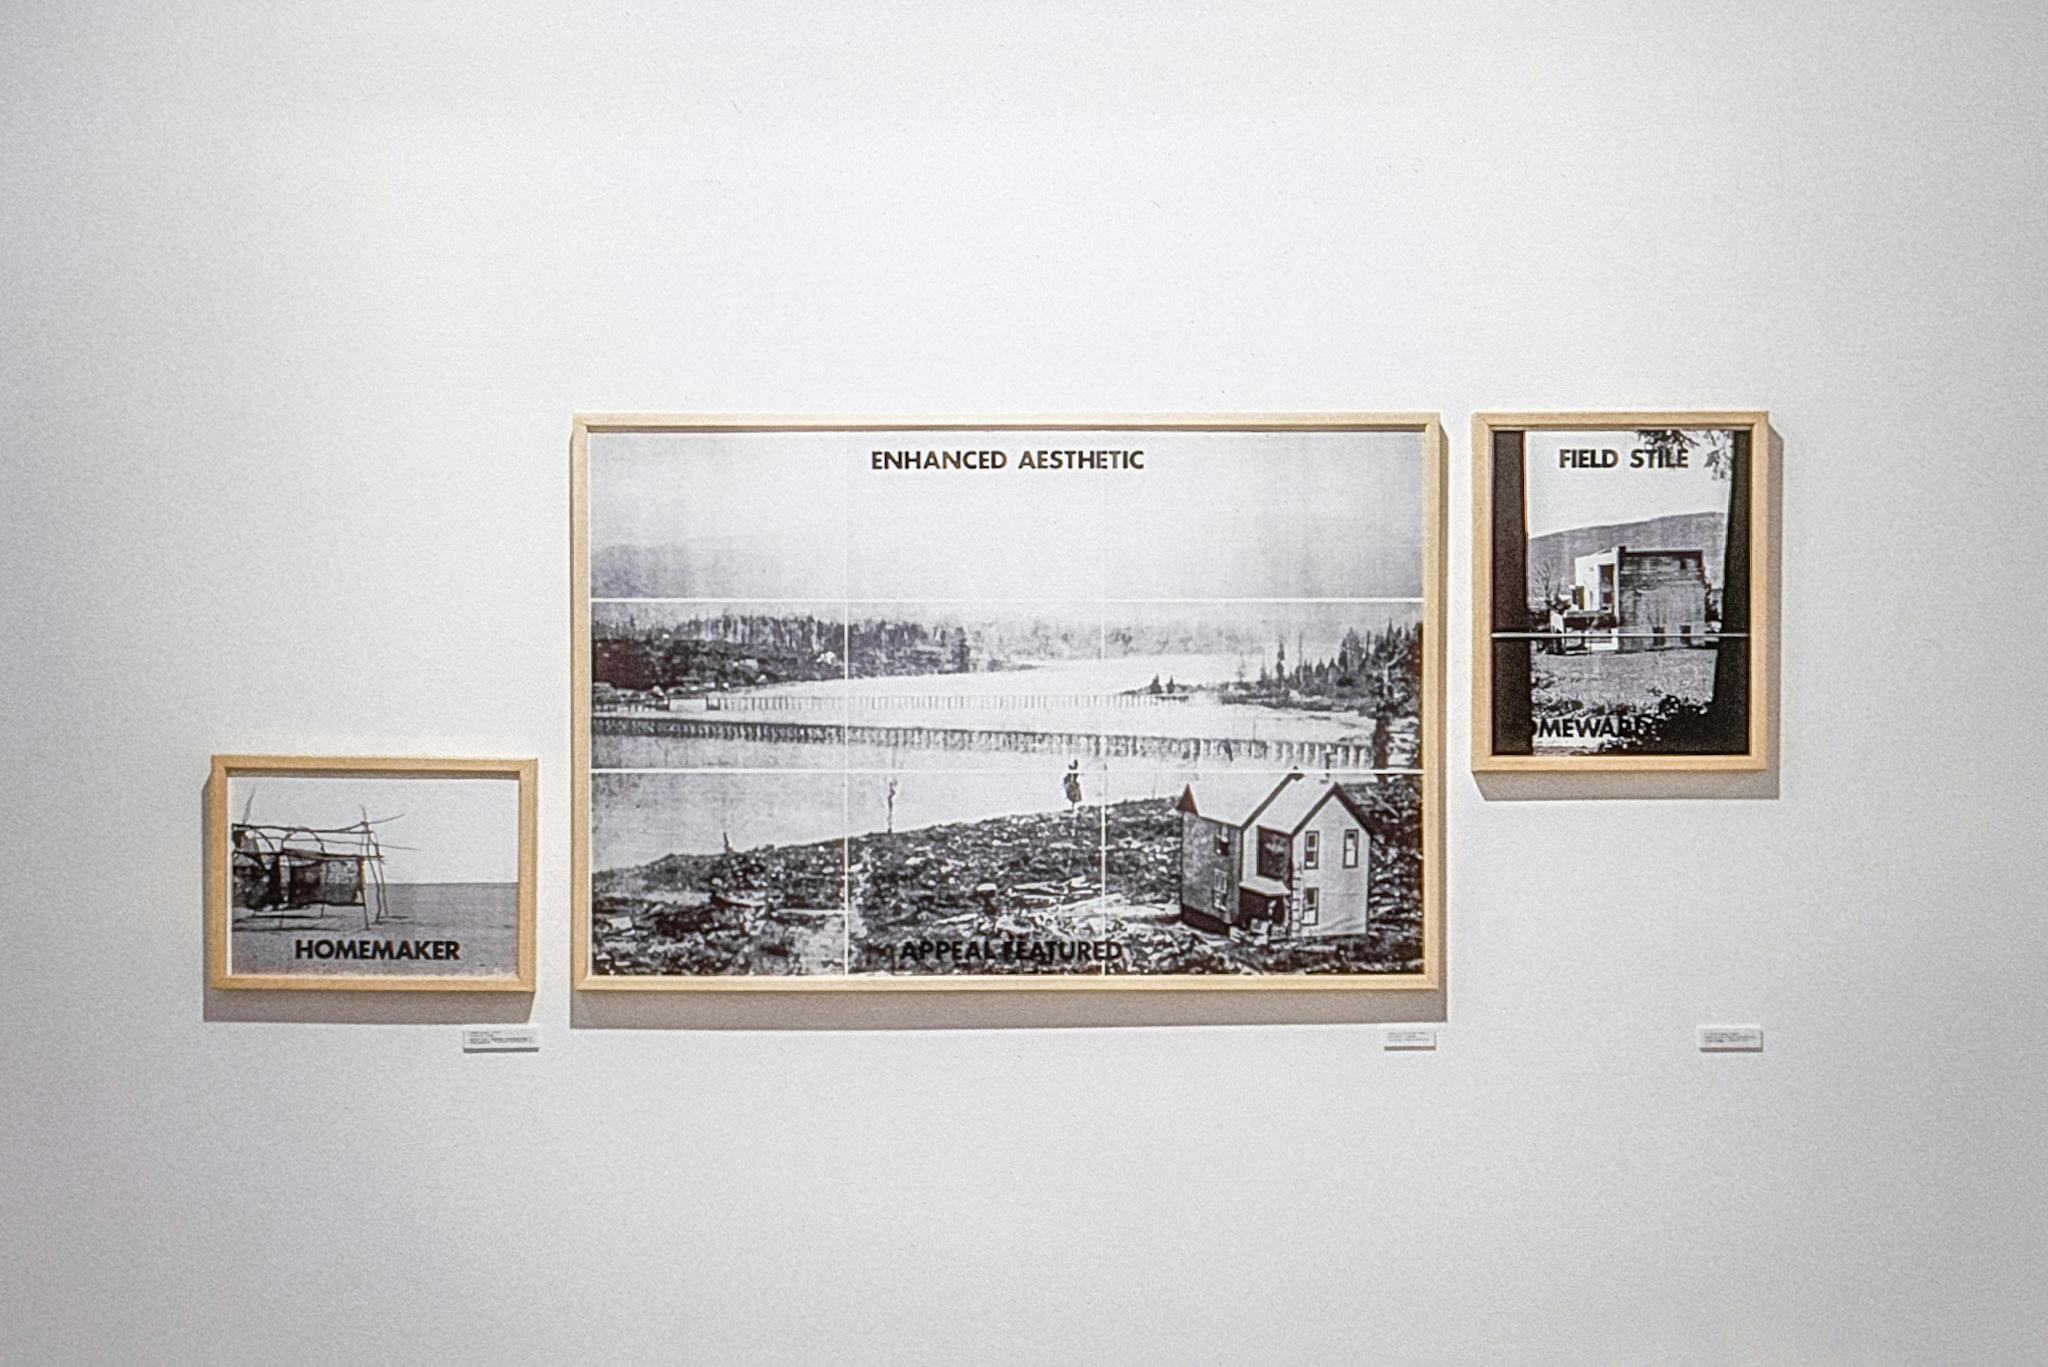 A large photo with 2 smaller photos on either side, all in natural wood frames, on a wall. All the photos show black and white landscapes with small buildings in the corner, and phrases in black text.